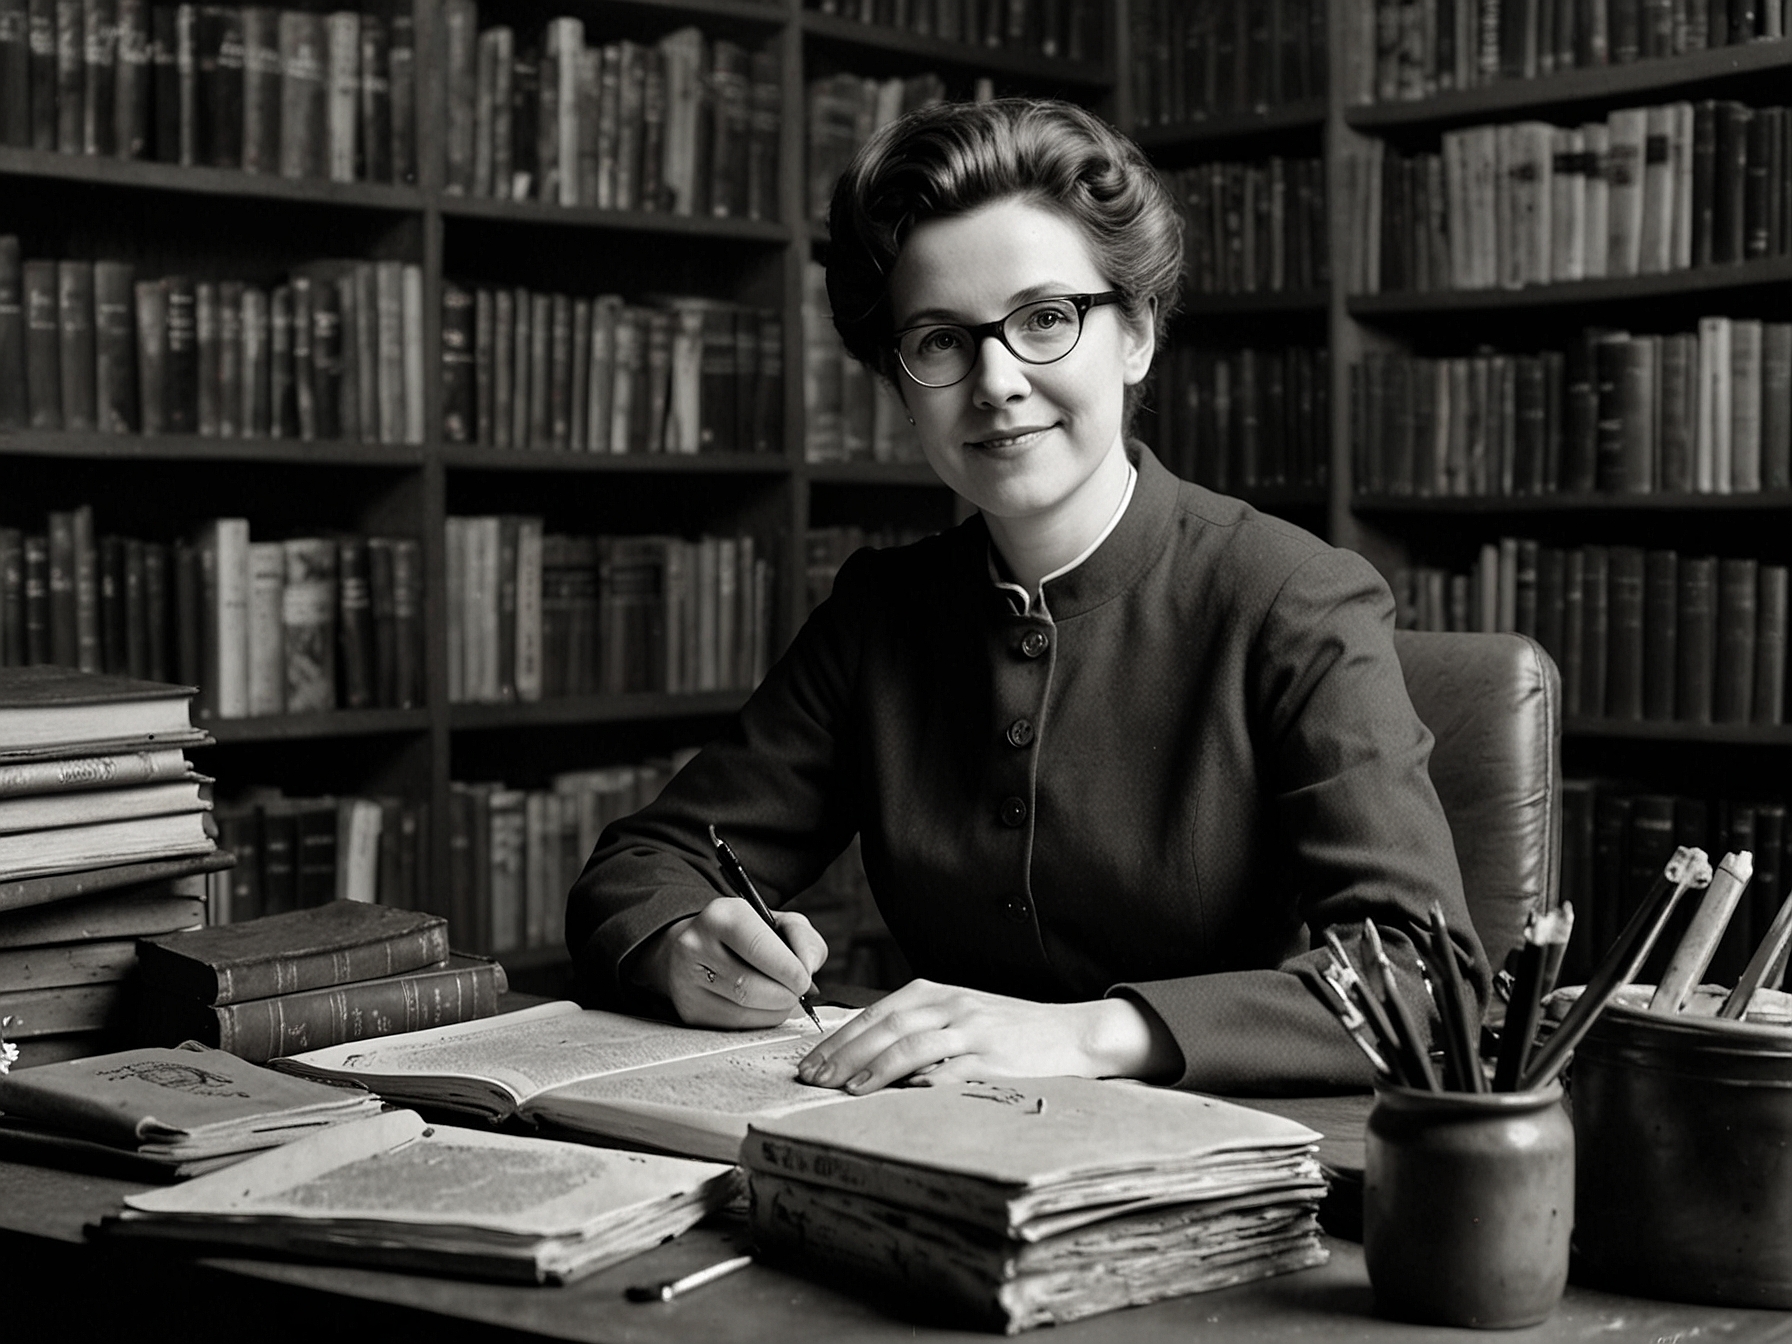 Agnes O’Farrelly at her desk, surrounded by books and papers on the Irish language, symbolizing her dedication to education and her role as a professor at UCD.